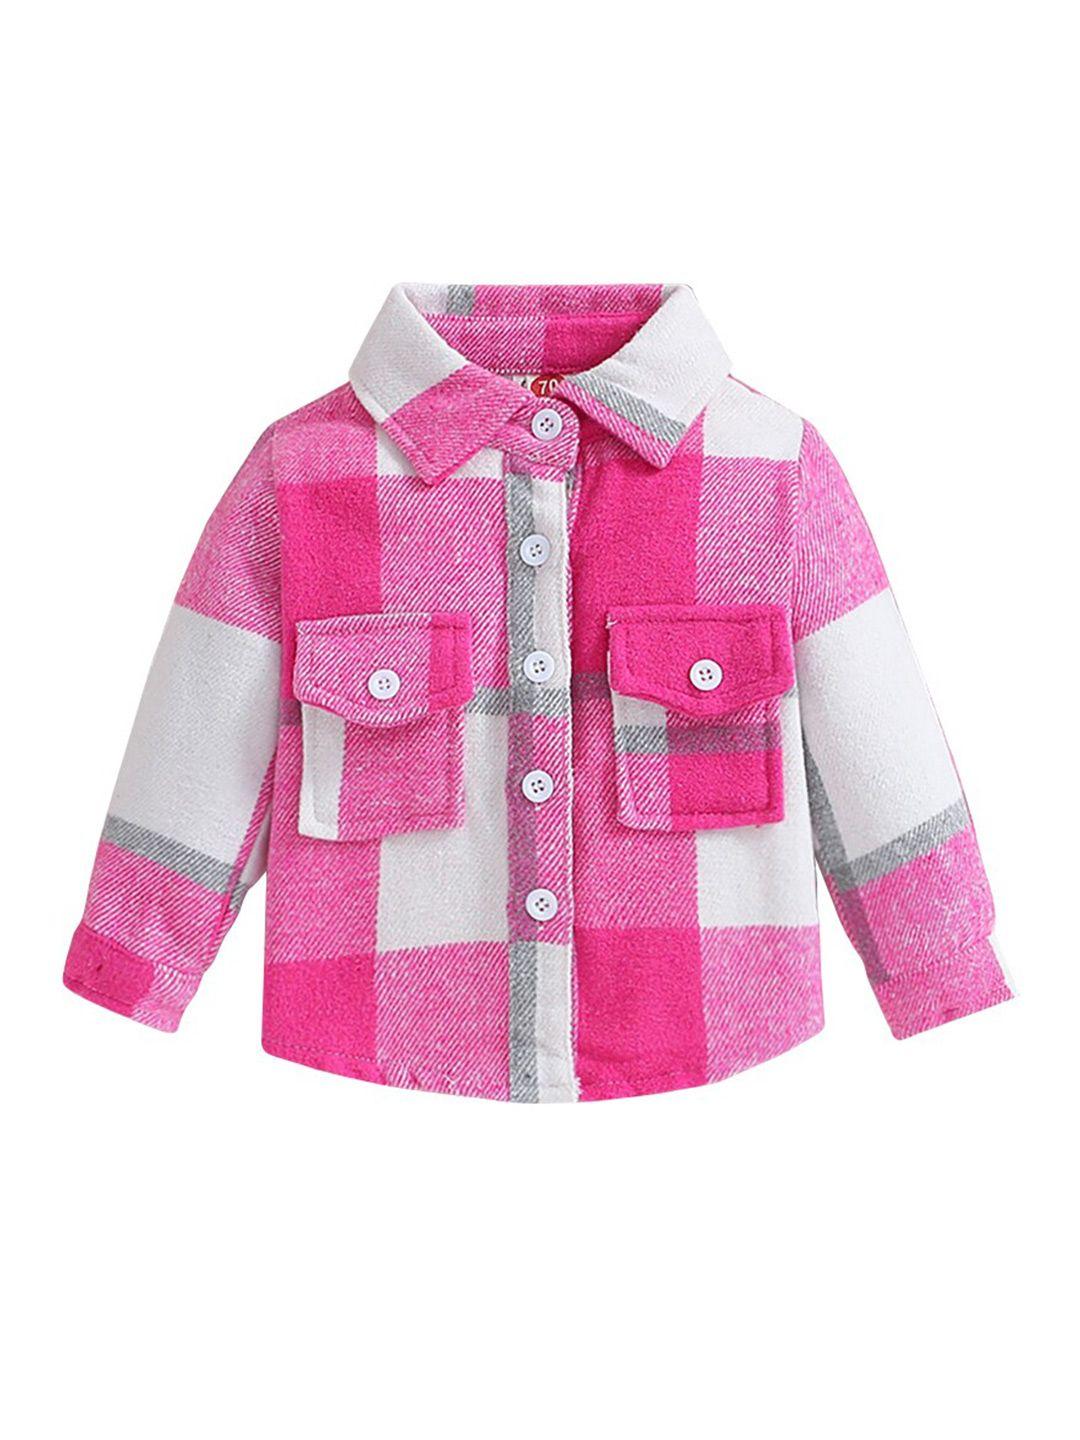 stylecast boys pink checked tailored jacket